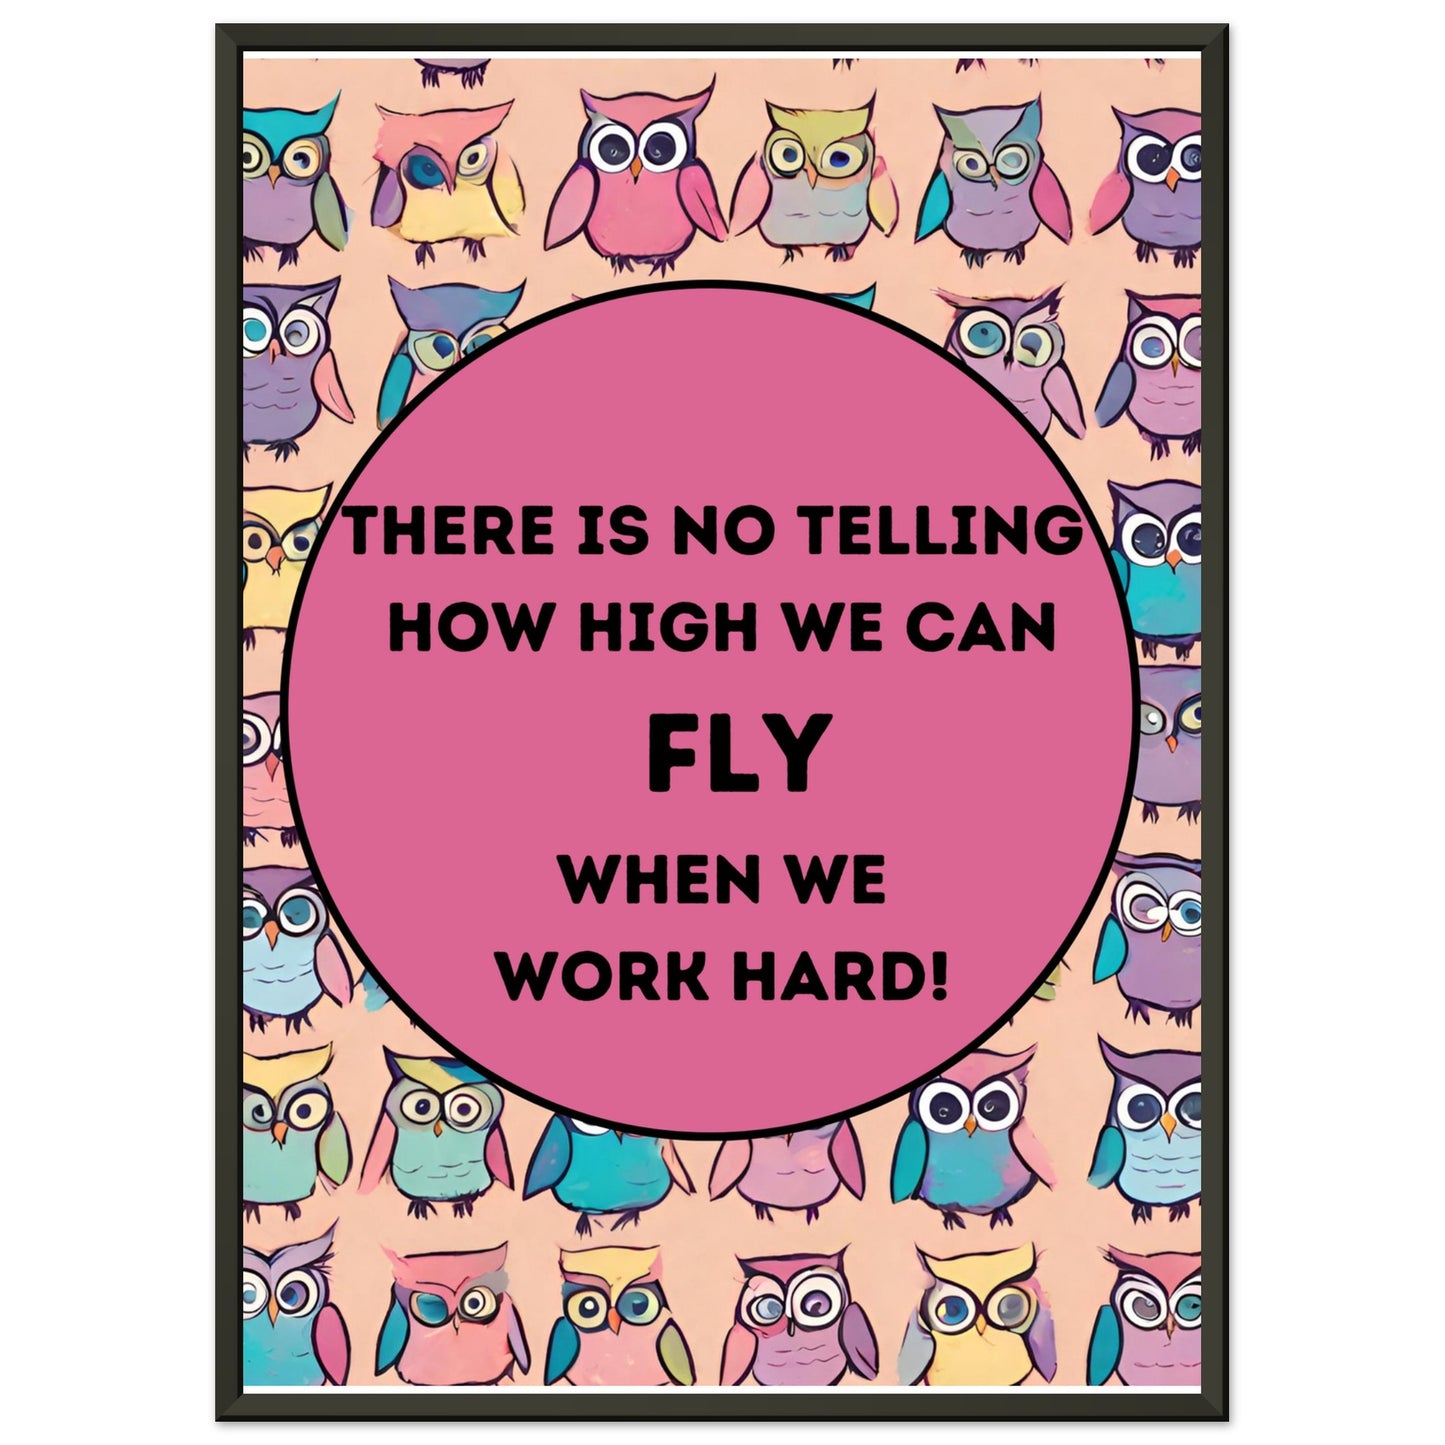 How High We Can FLY Premium Matte Paper Metal Framed Poster